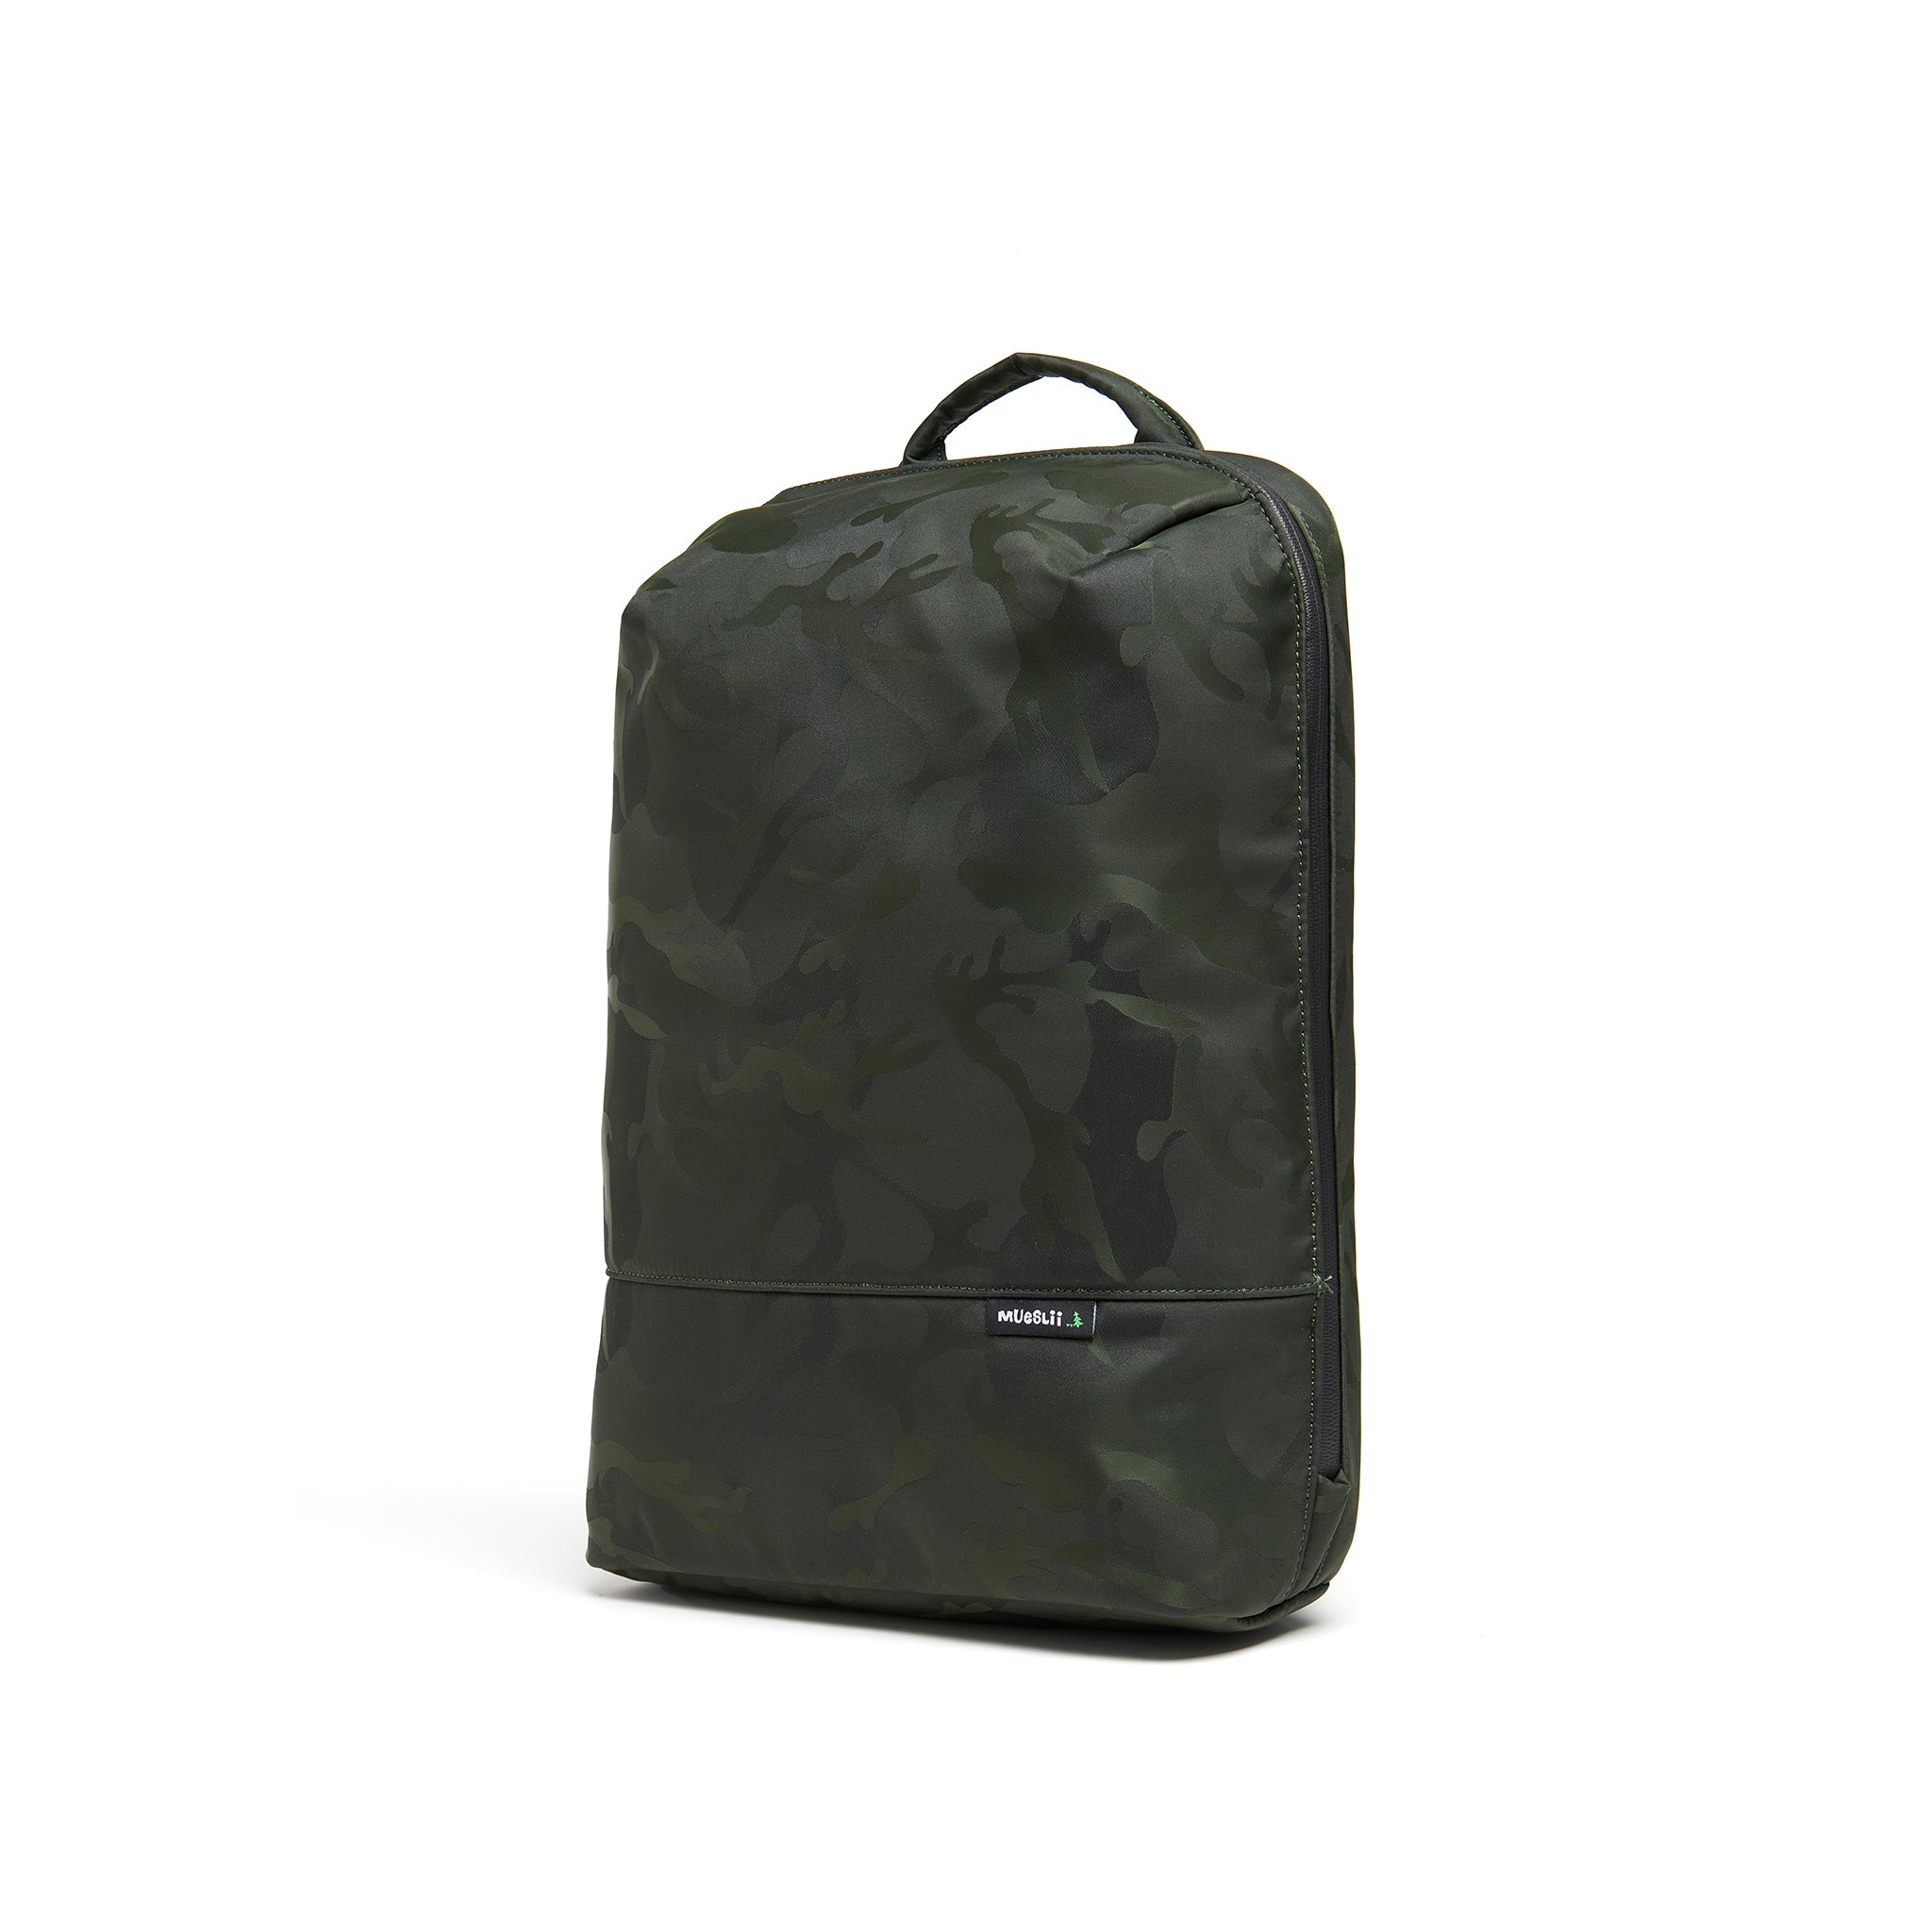 Mueslii daily backpack, made of jacquard  waterproof nylon, camouflage pattern, with a laptop compartment, color green, side view.